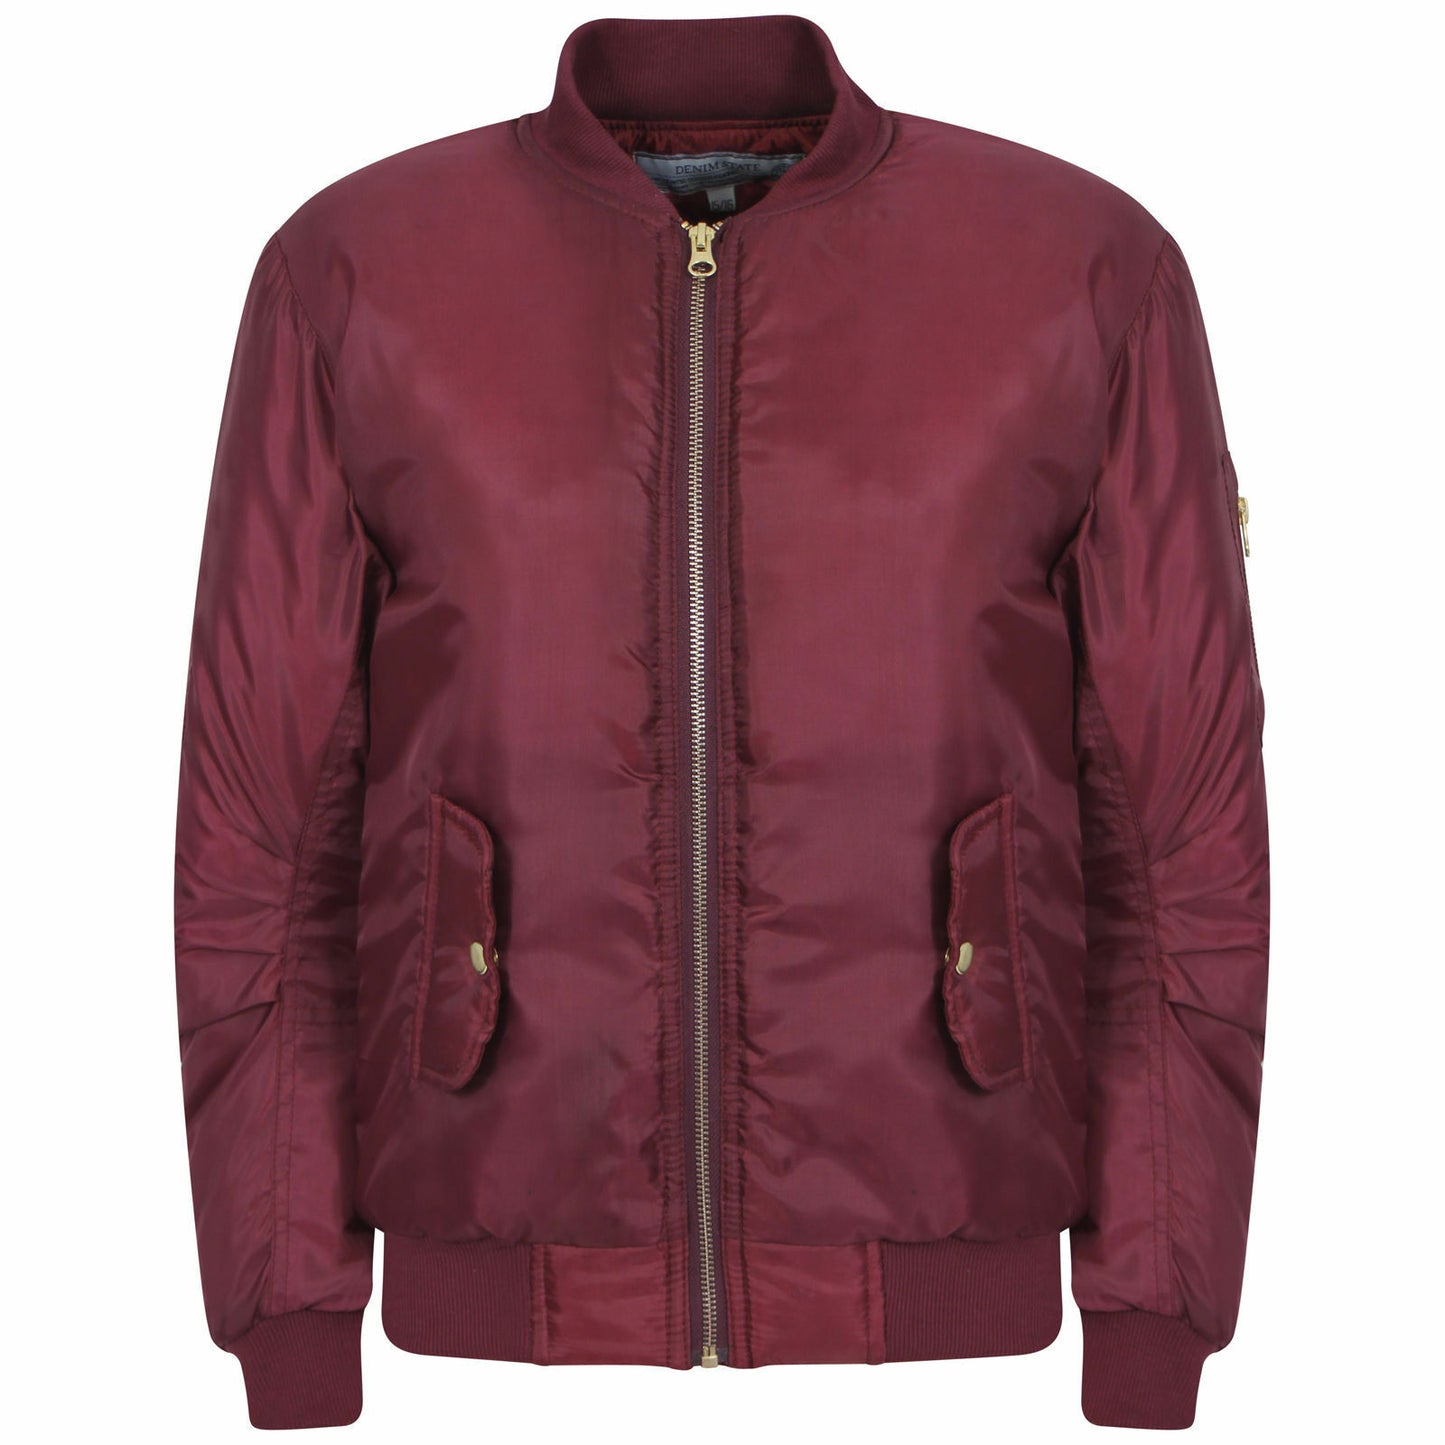 Children's Wine Coloured Bomber Jacket.It Has An Elasticated Ribbed Collar, Waistband & Cuffs. Has 2 Front Pockets And Pocket On The Sleeve . Ages 5-16 Available.